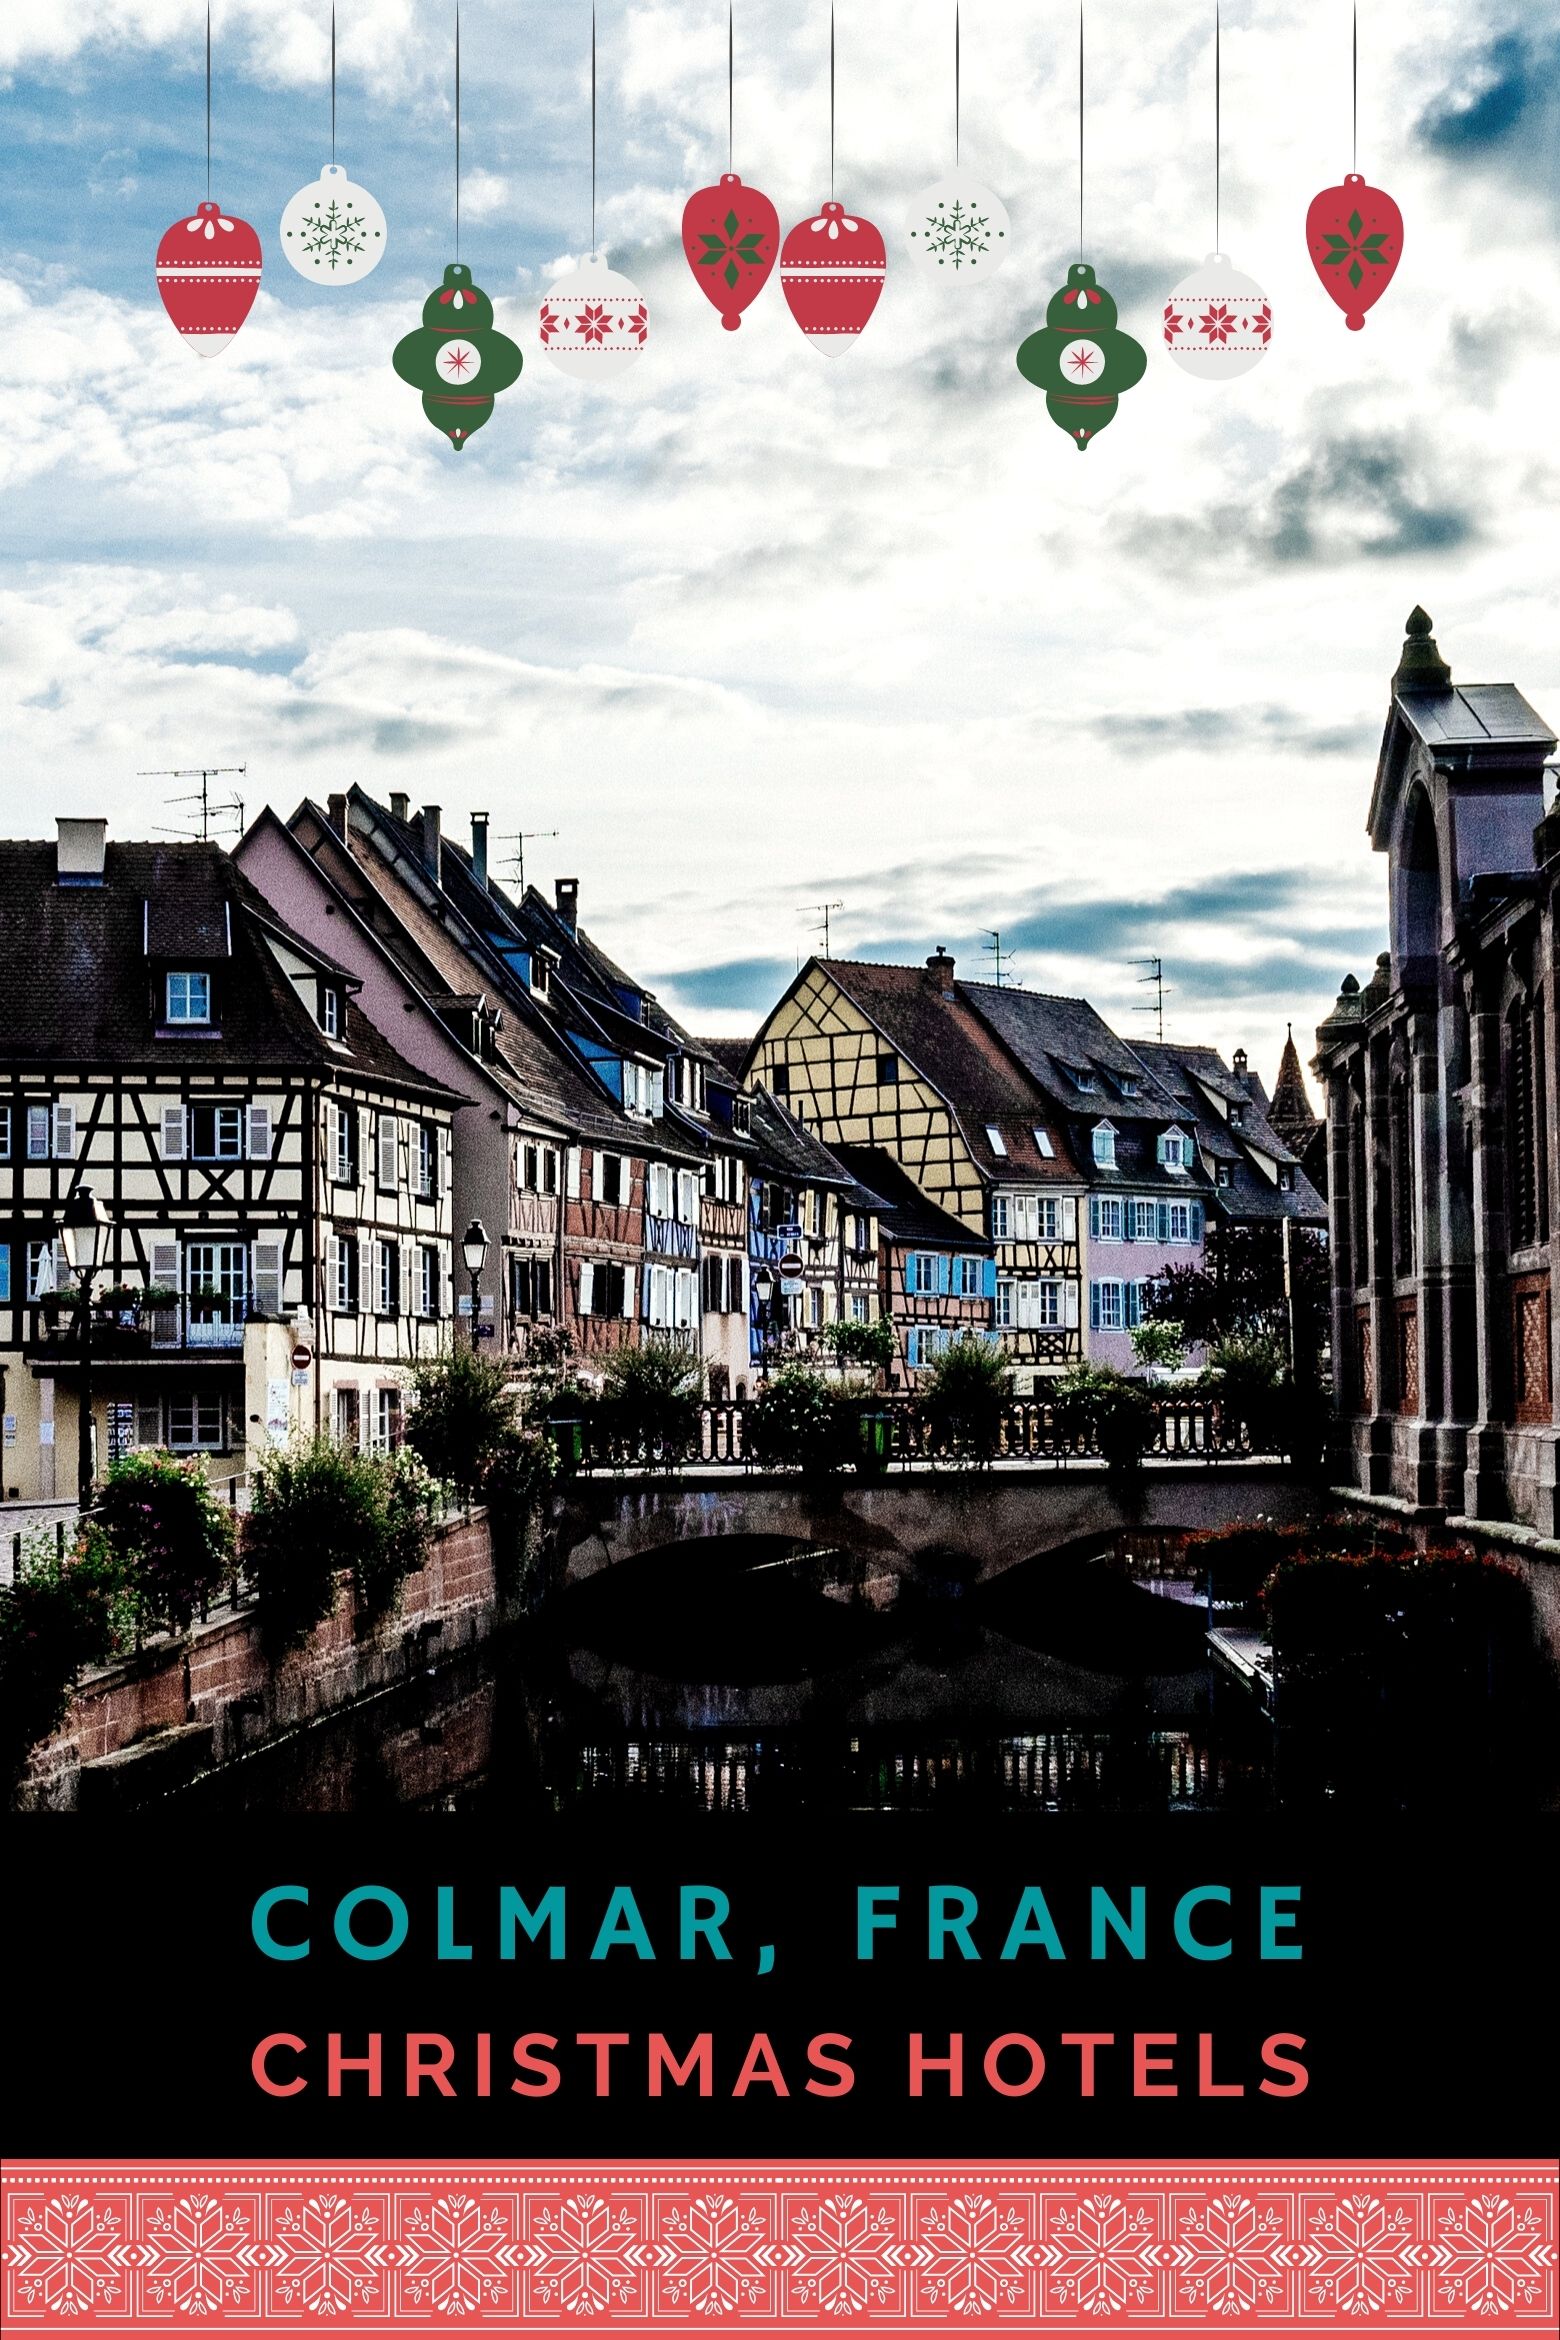 Half-timbered houses and canal in Colmar.